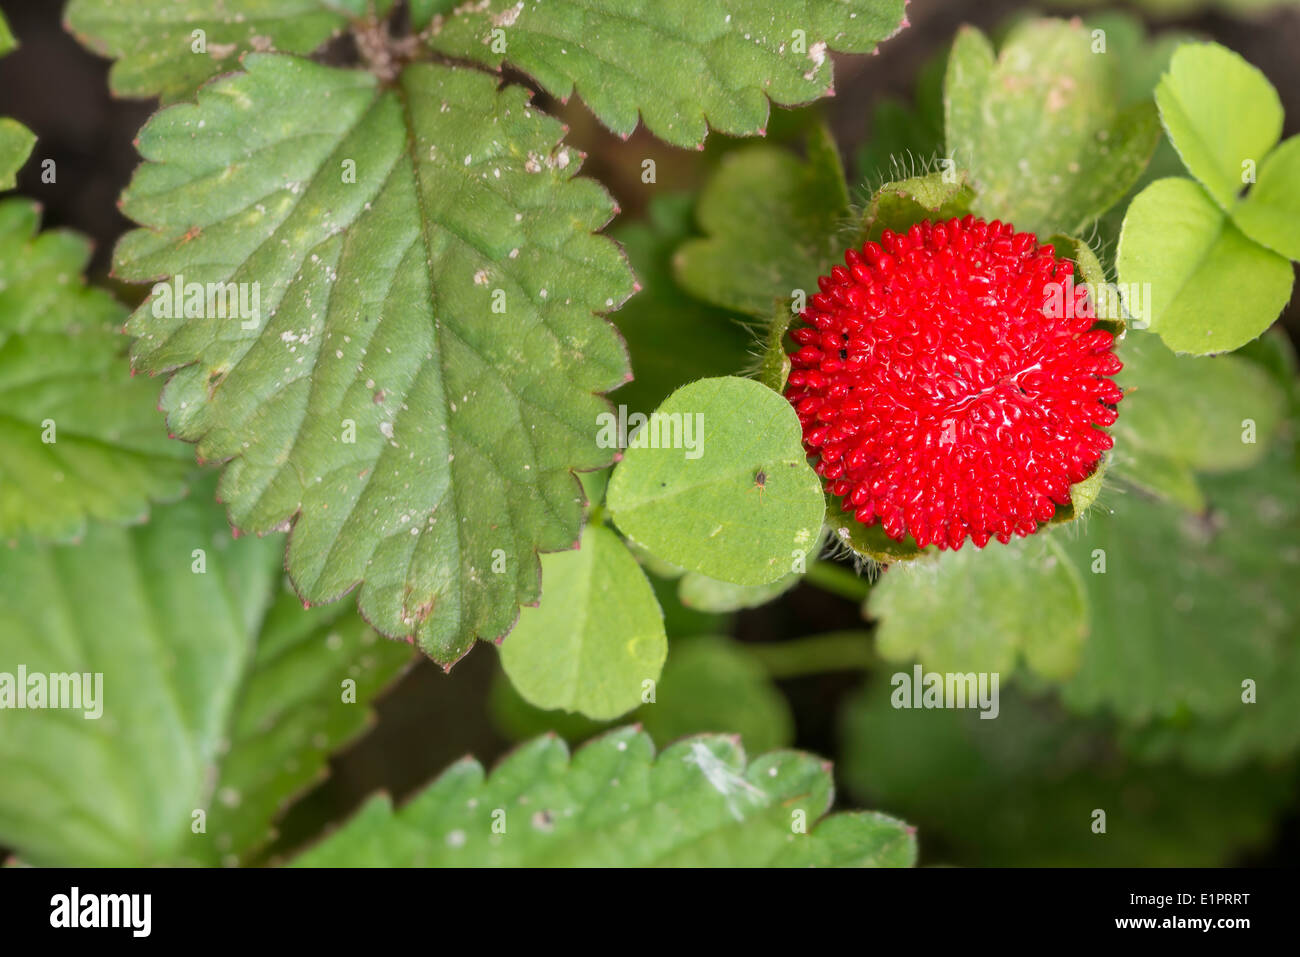 A Duchesnea indica (Mock Strawberry) close to some heart shaped clover leaves Stock Photo